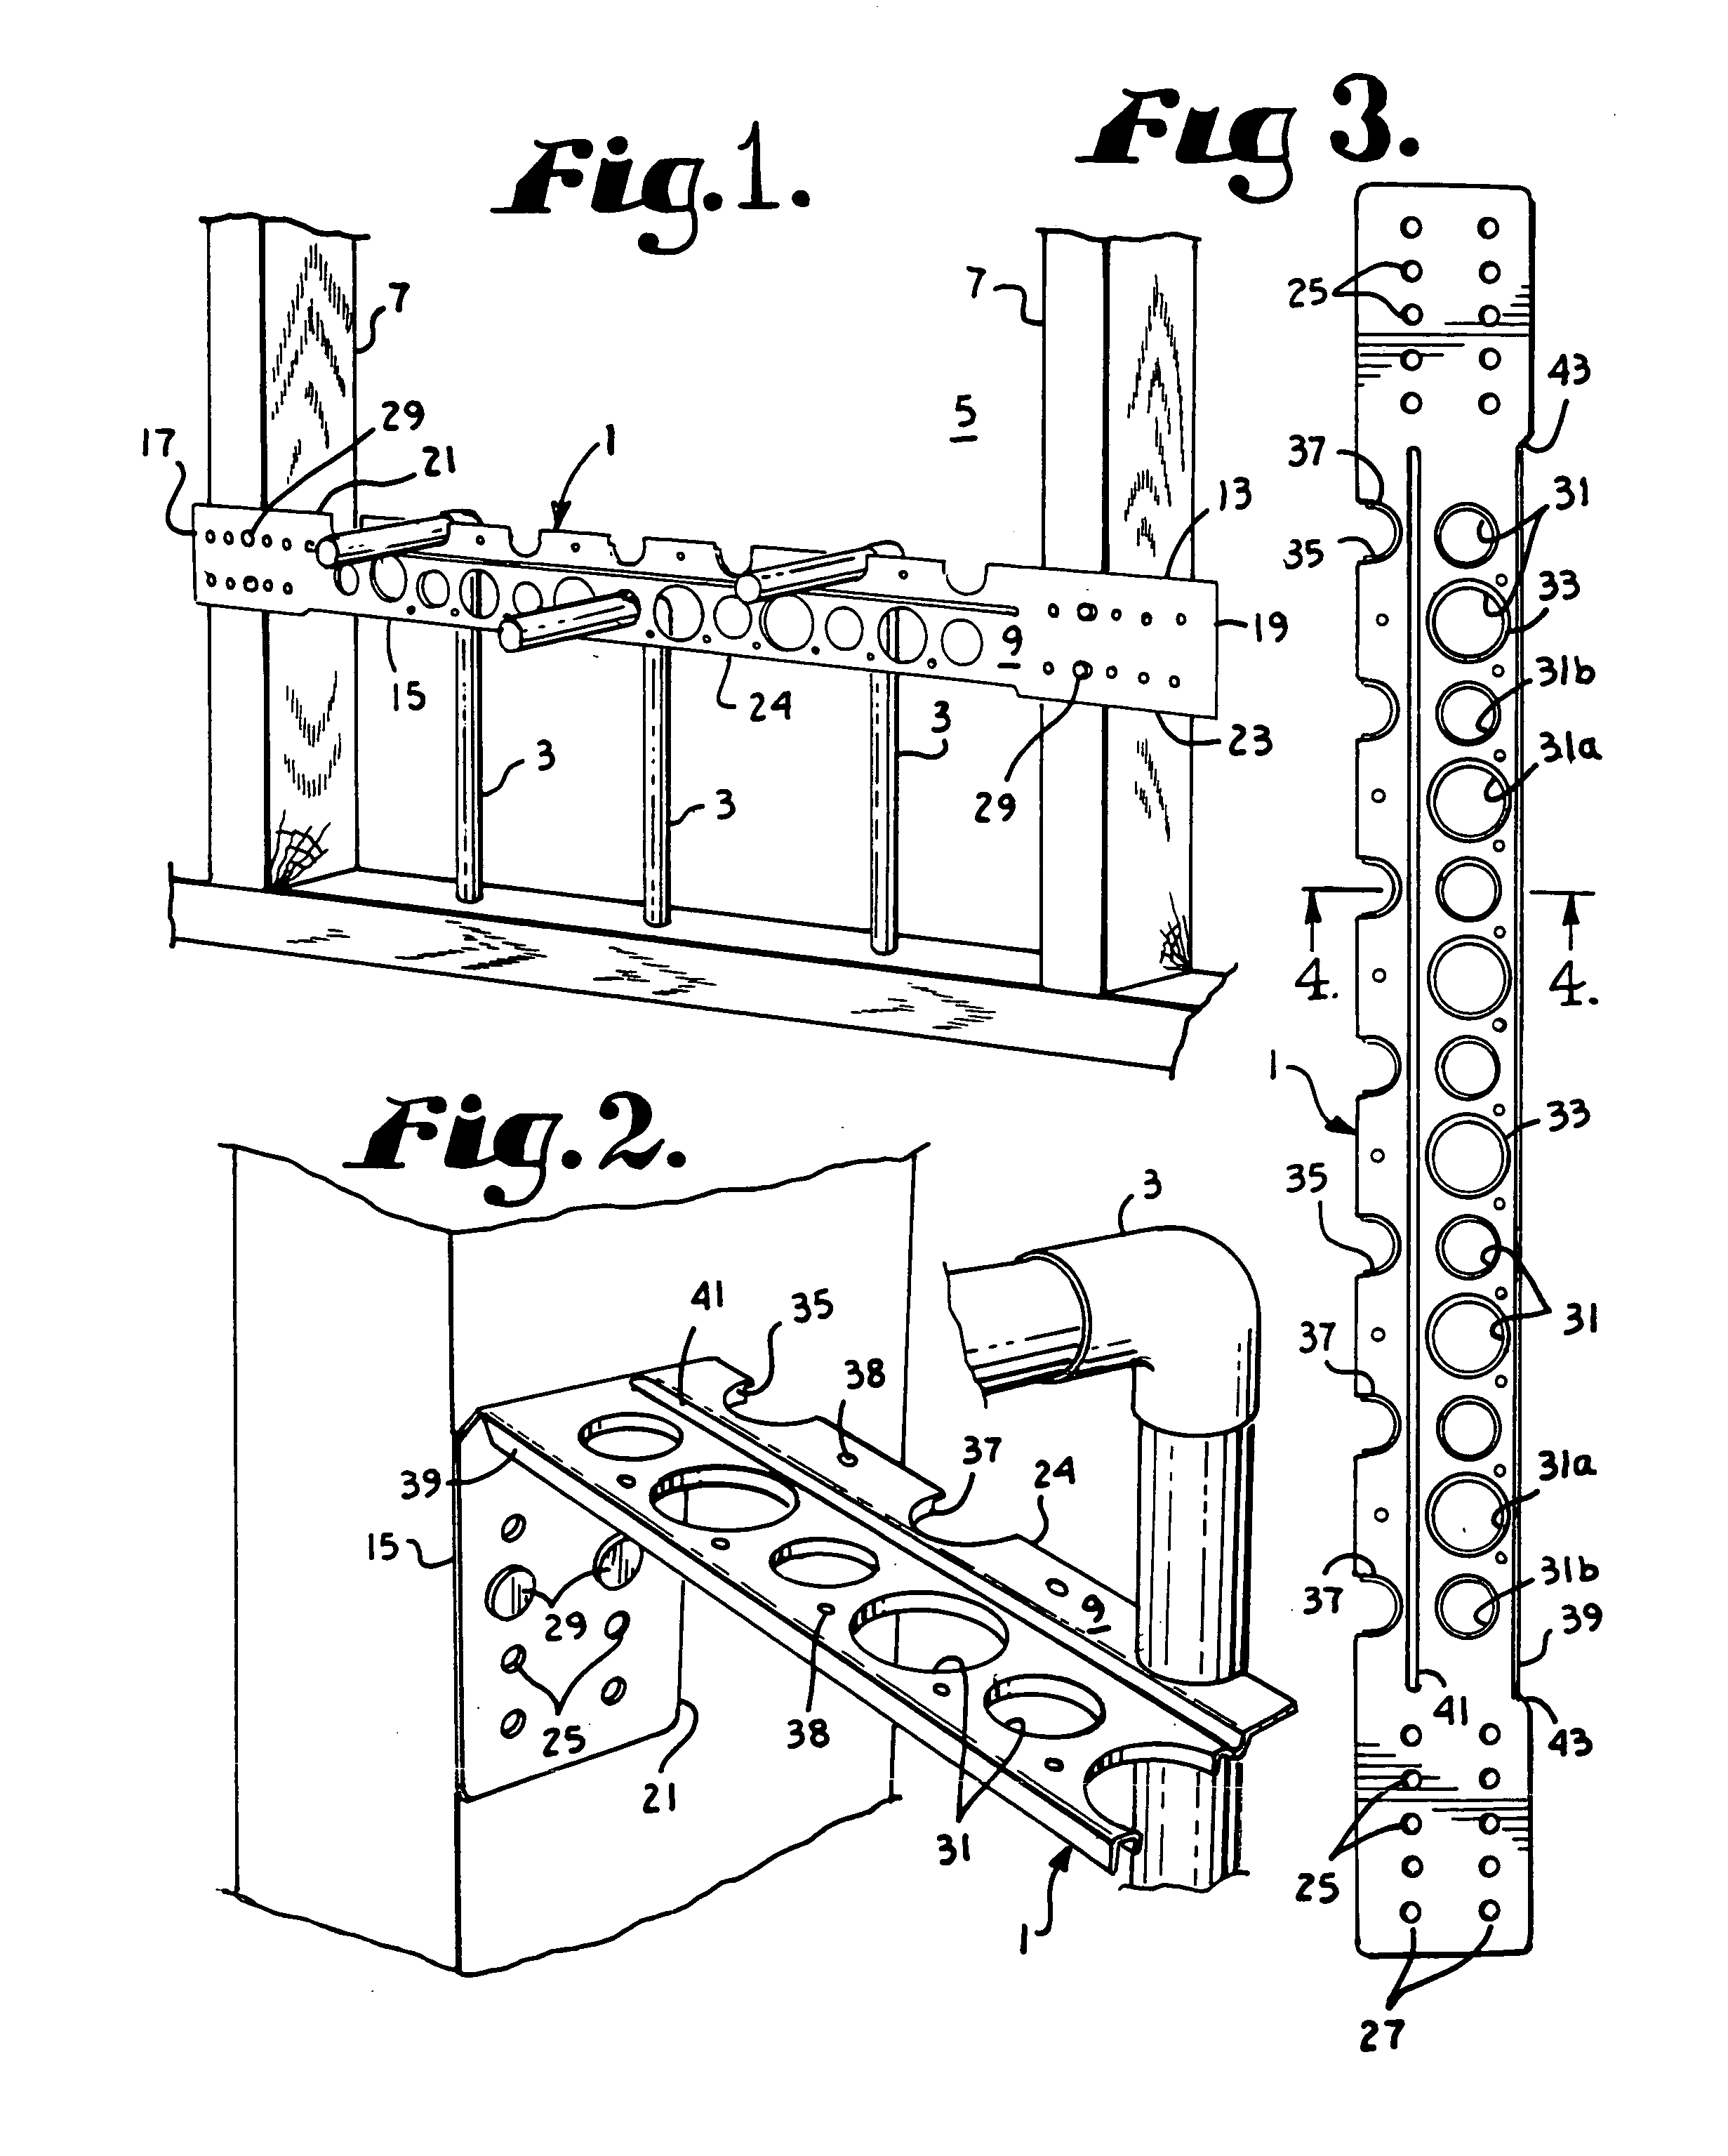 Notched plumbing support bracket